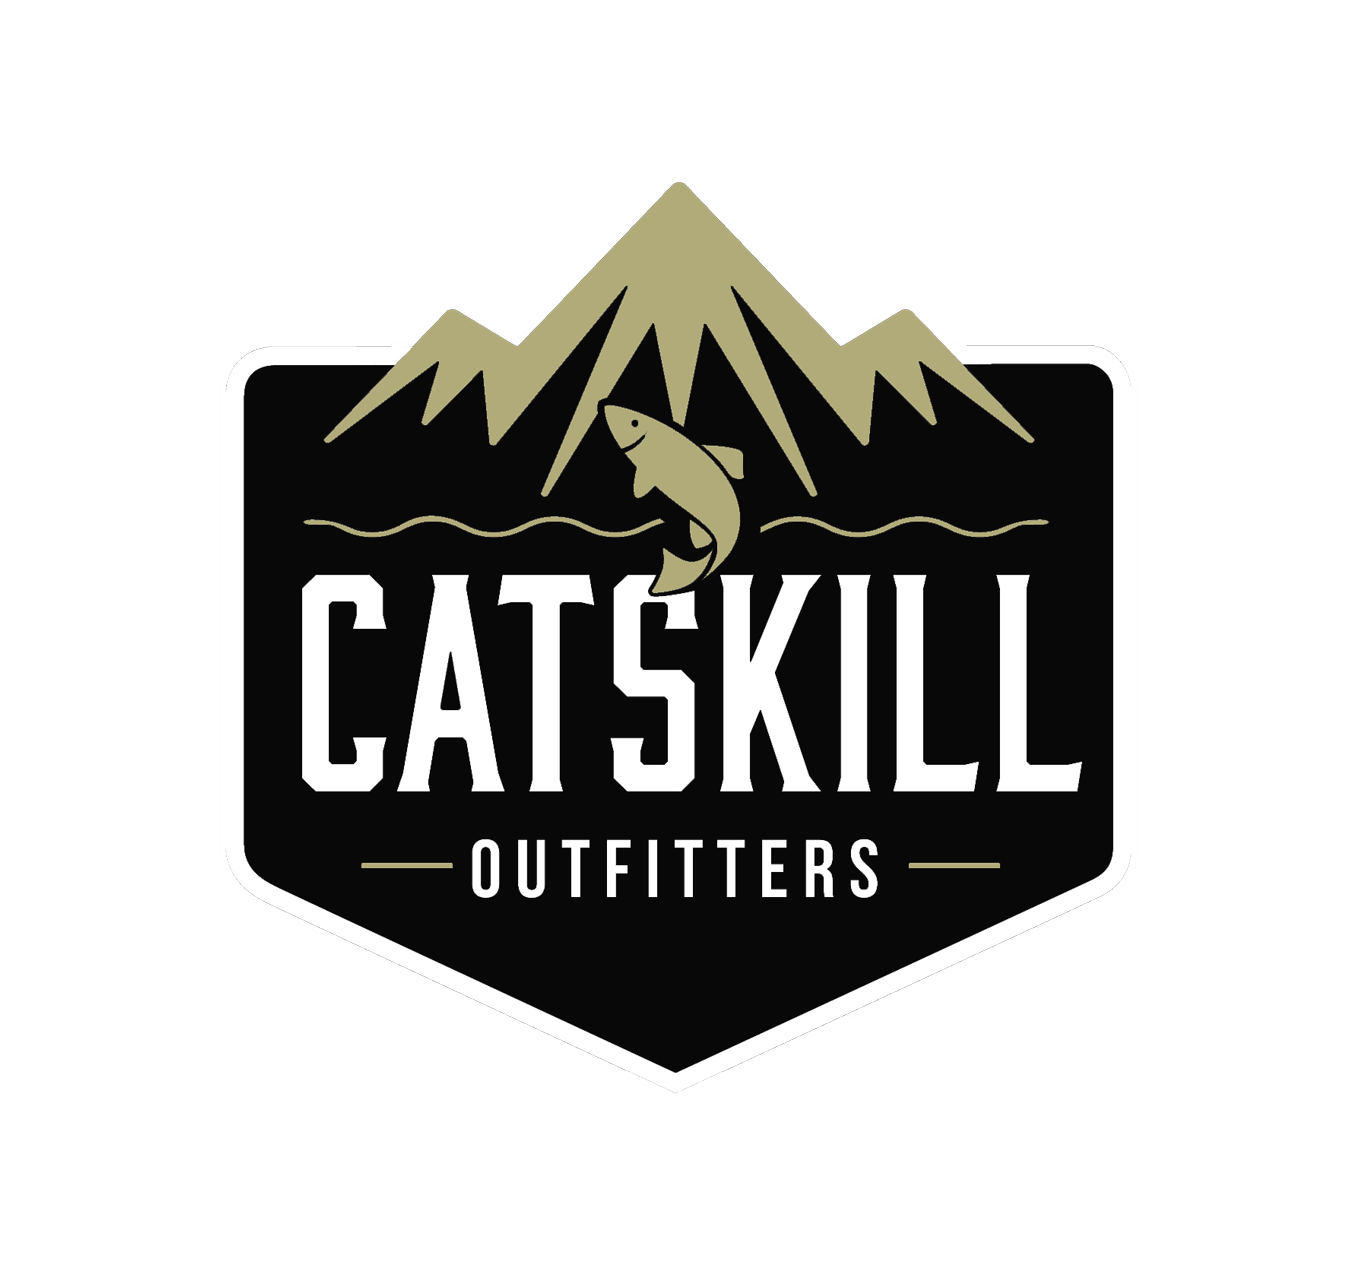 Catskill Fly Fishing Guides, Based in Phoenicia New York